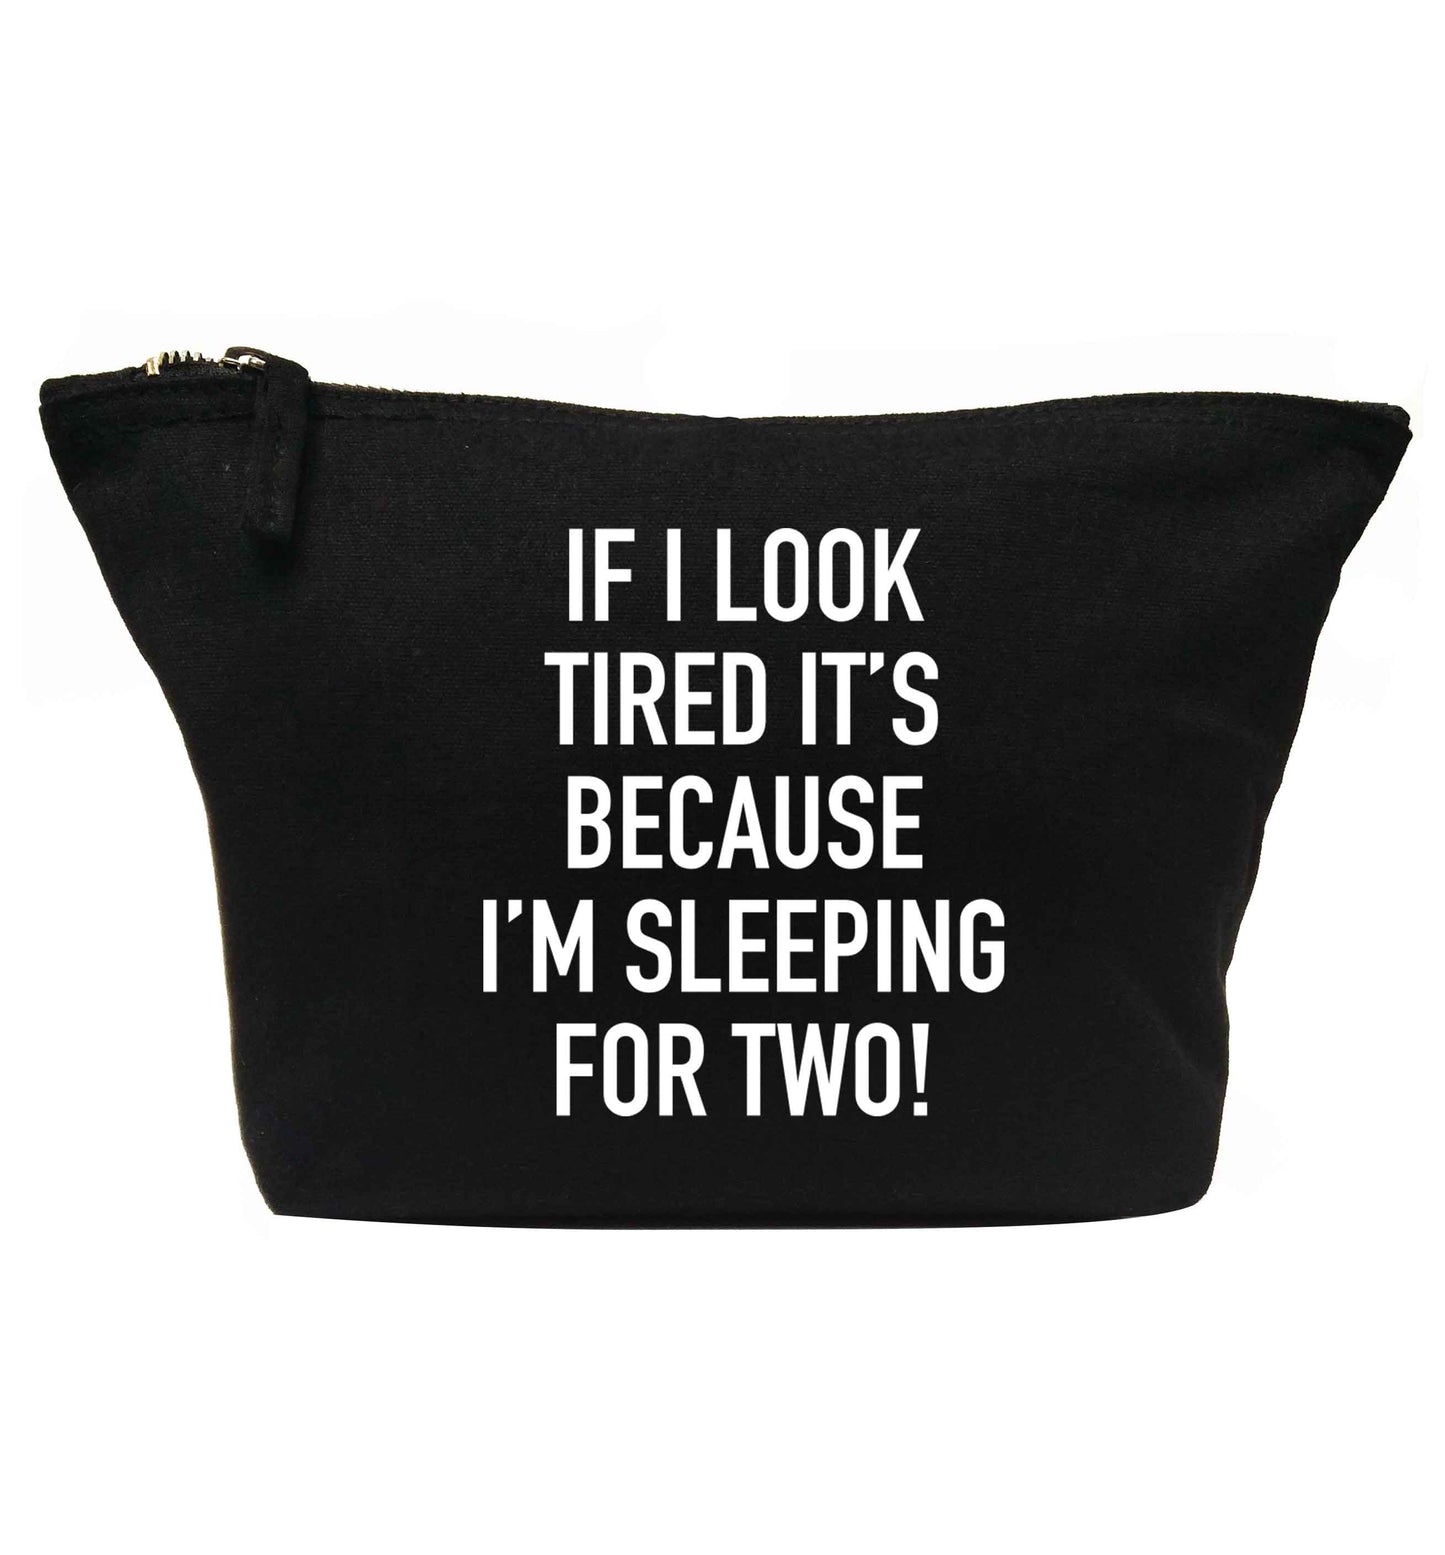 If I look tired it's because I'm sleeping for two | makeup / wash bag